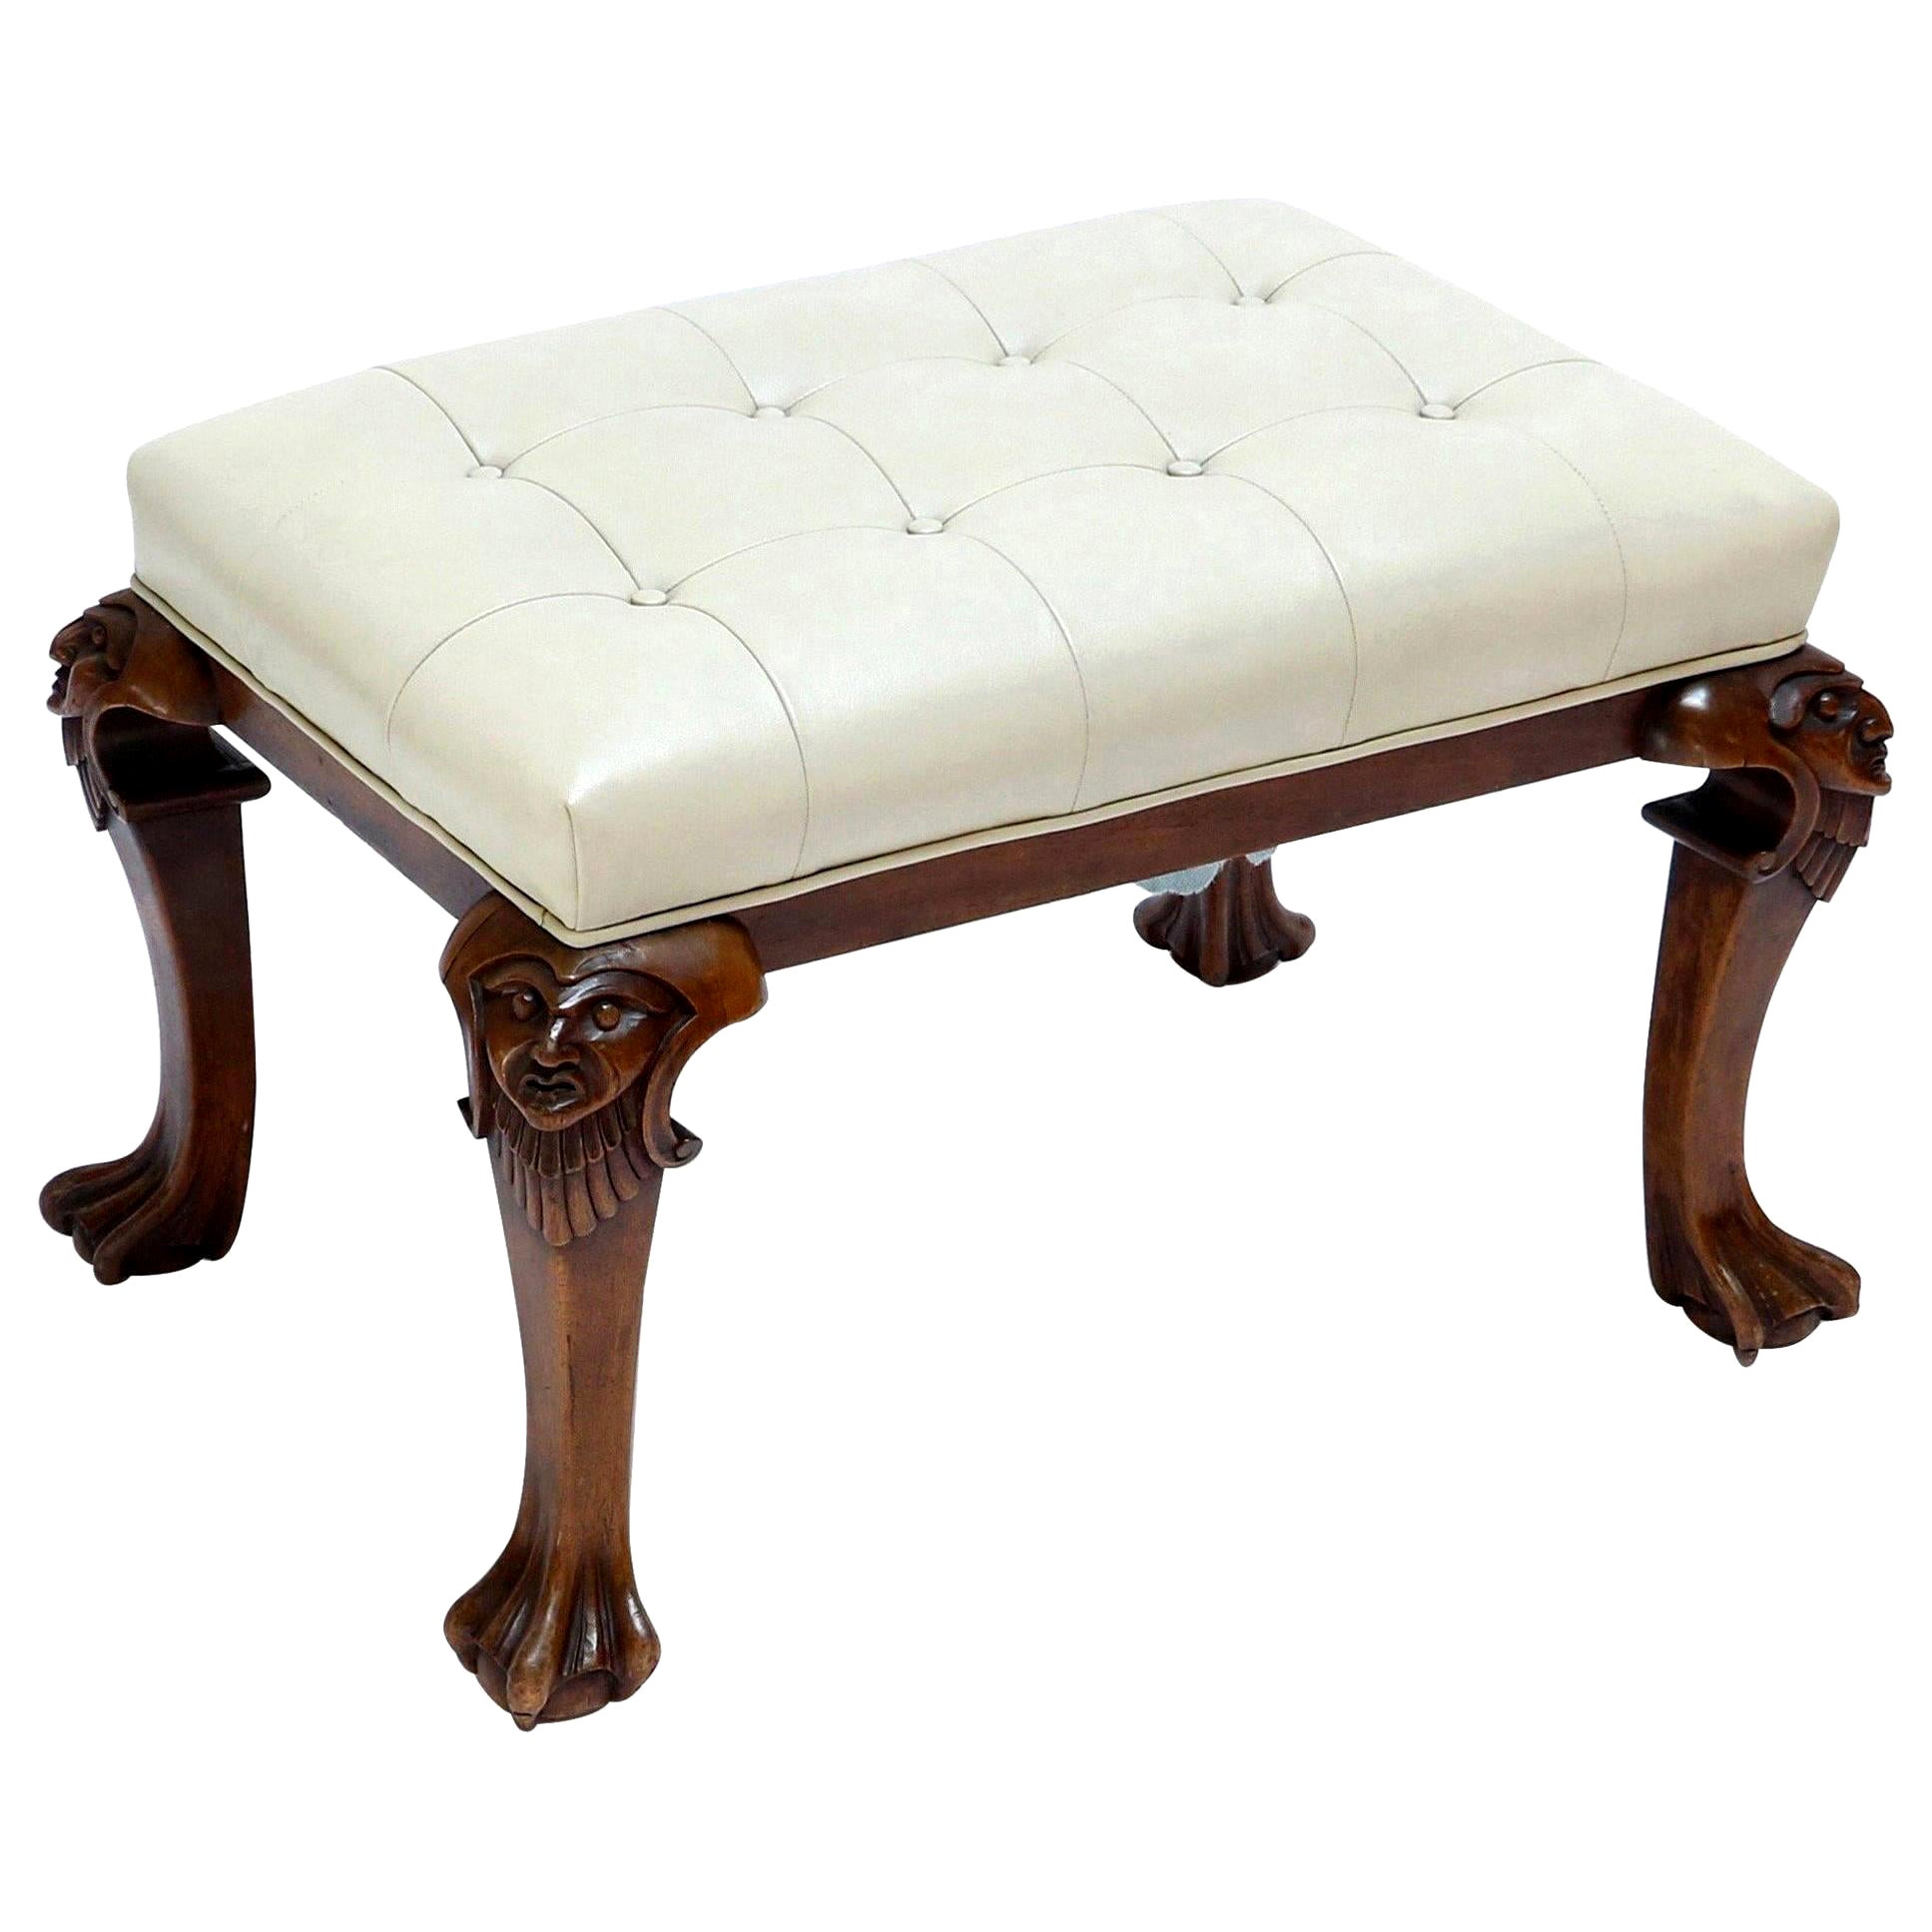 1960s, Italian Carved Wood Tufted Tan Leather Bench